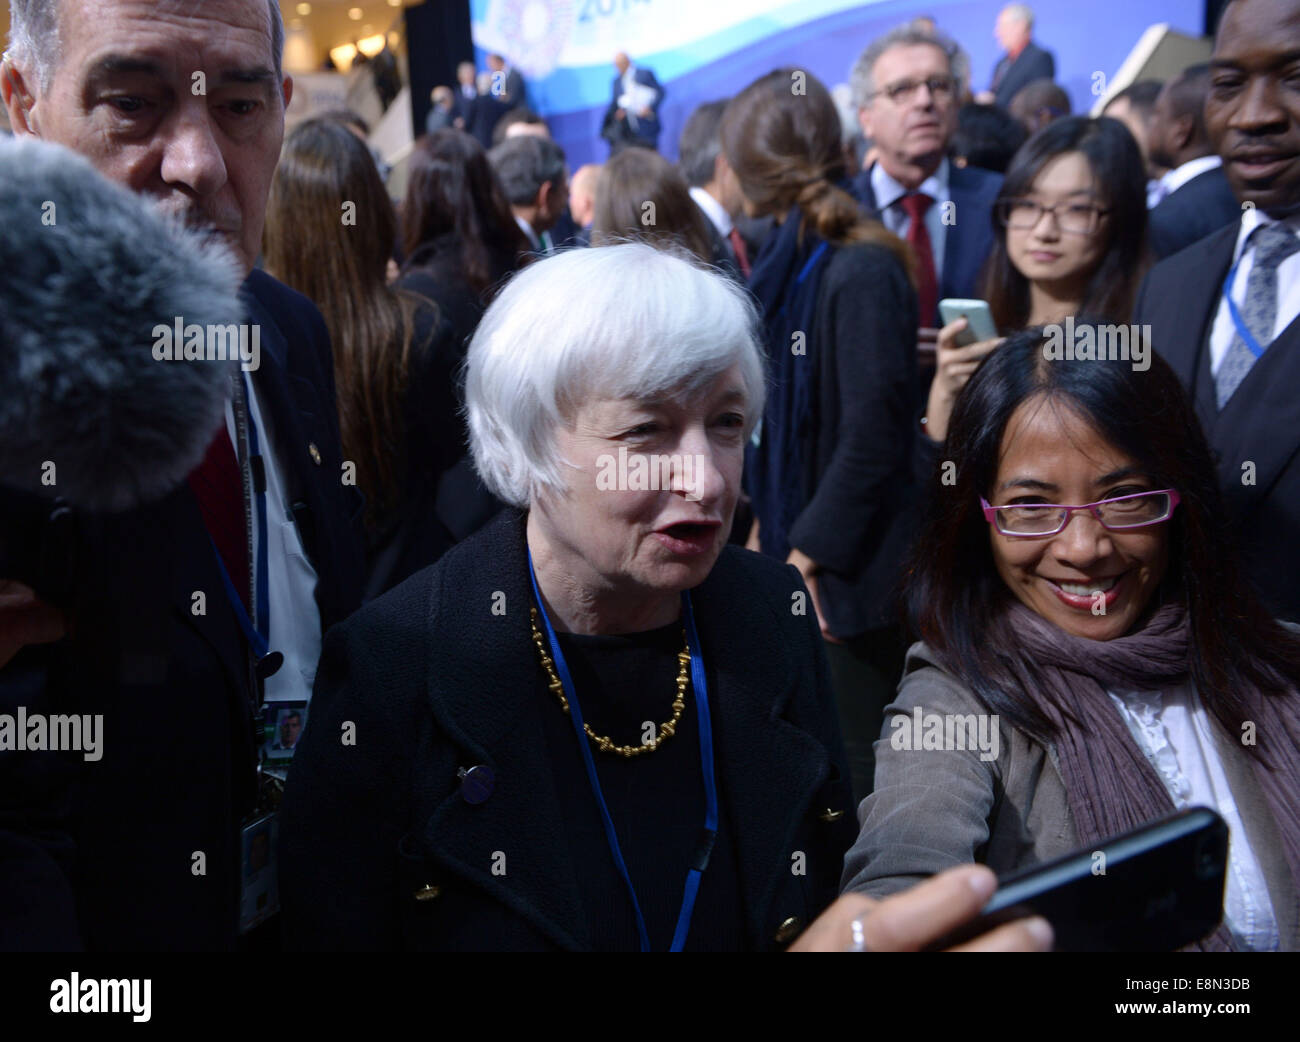 Washington, DC, USA. 11th Oct, 2014. U.S. Federal Reserve Chair Janet Yellen arrives for the International Monetary and Financial Committee (IMFC) meeting during the annual Meetings of the World Bank and International Monetary Fund (IMF) in Washington, DC, capital of the United States, Oct. 11, 2014. Credit:  Yin Bogu/Xinhua/Alamy Live News Stock Photo